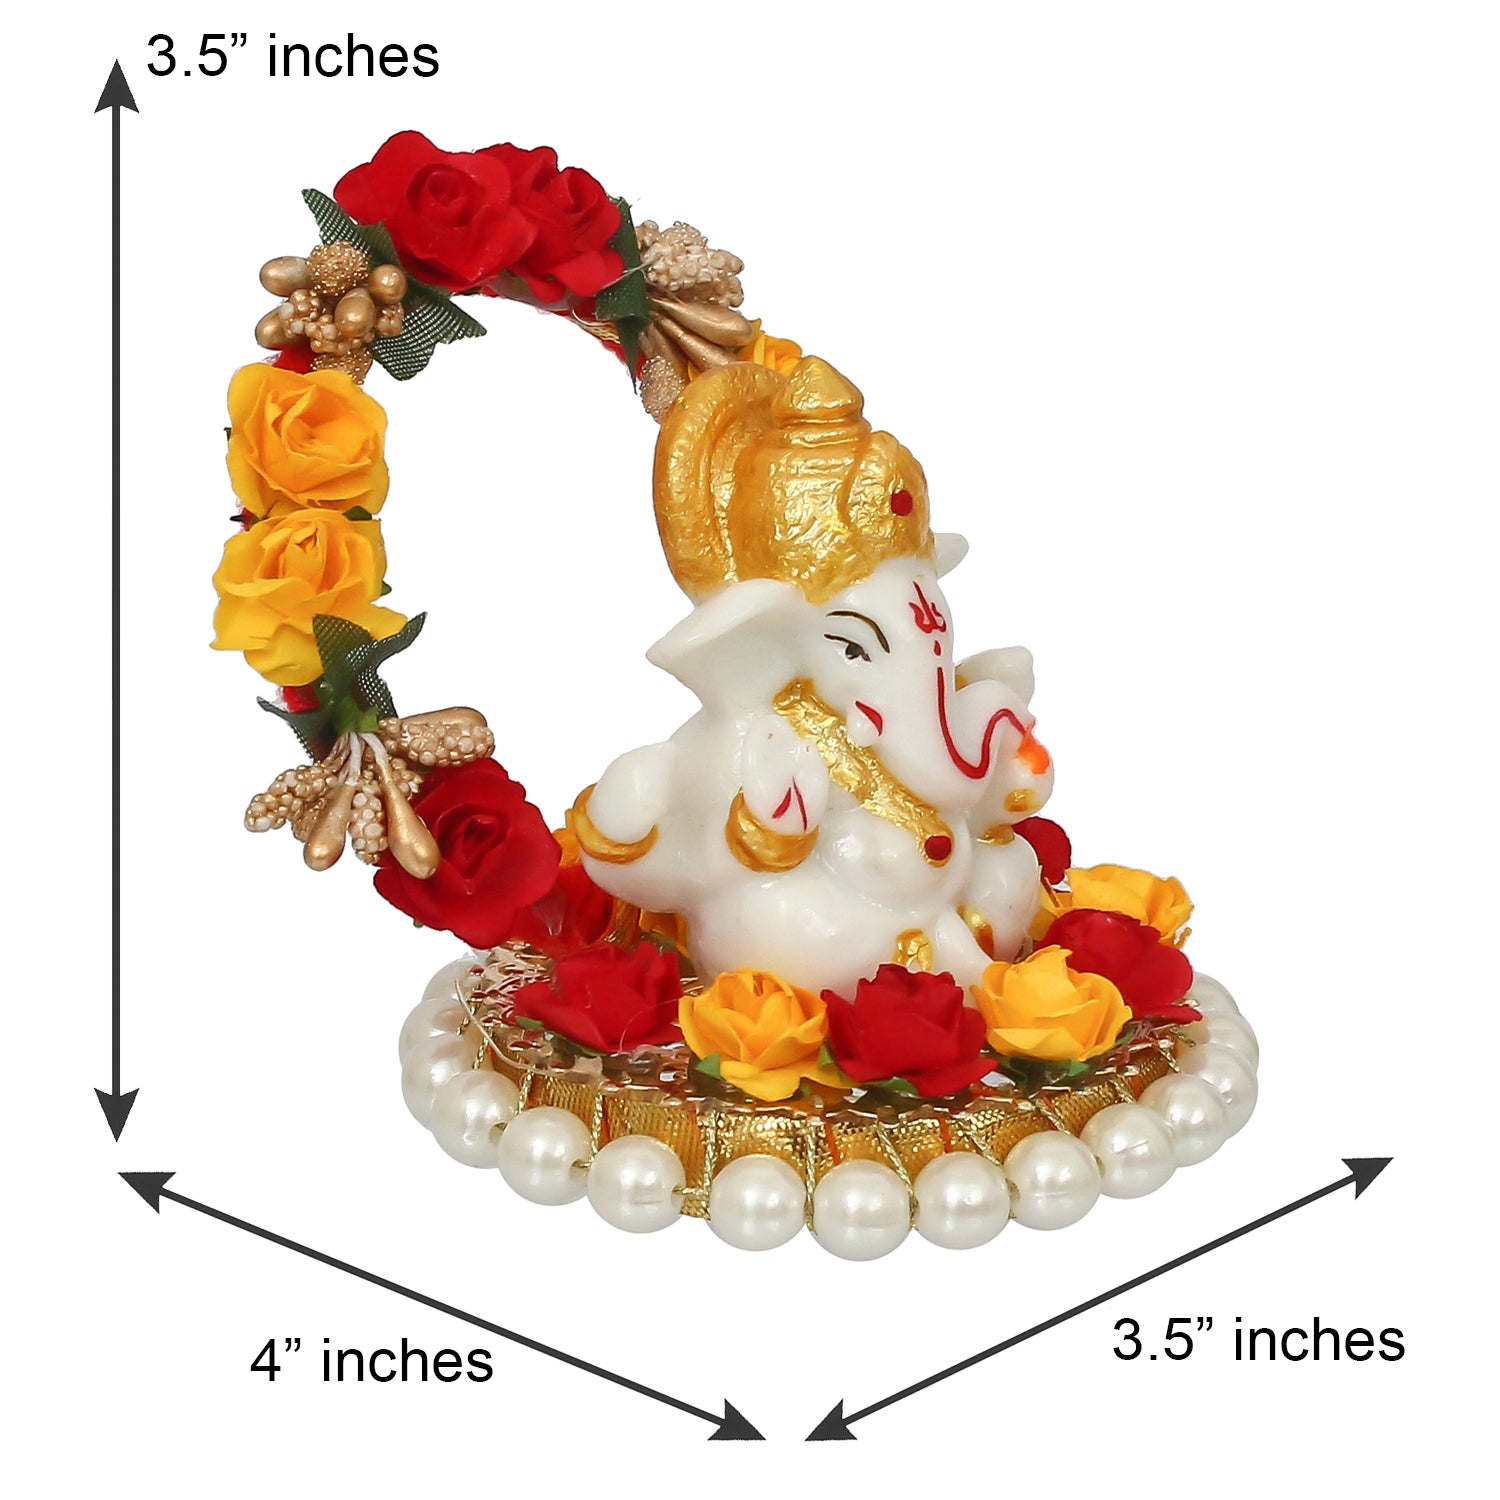 Polyresin Lord Ganesha Idol on Decorative Handcrafted Rose Flower Plate for Home and Car Dashboard 2